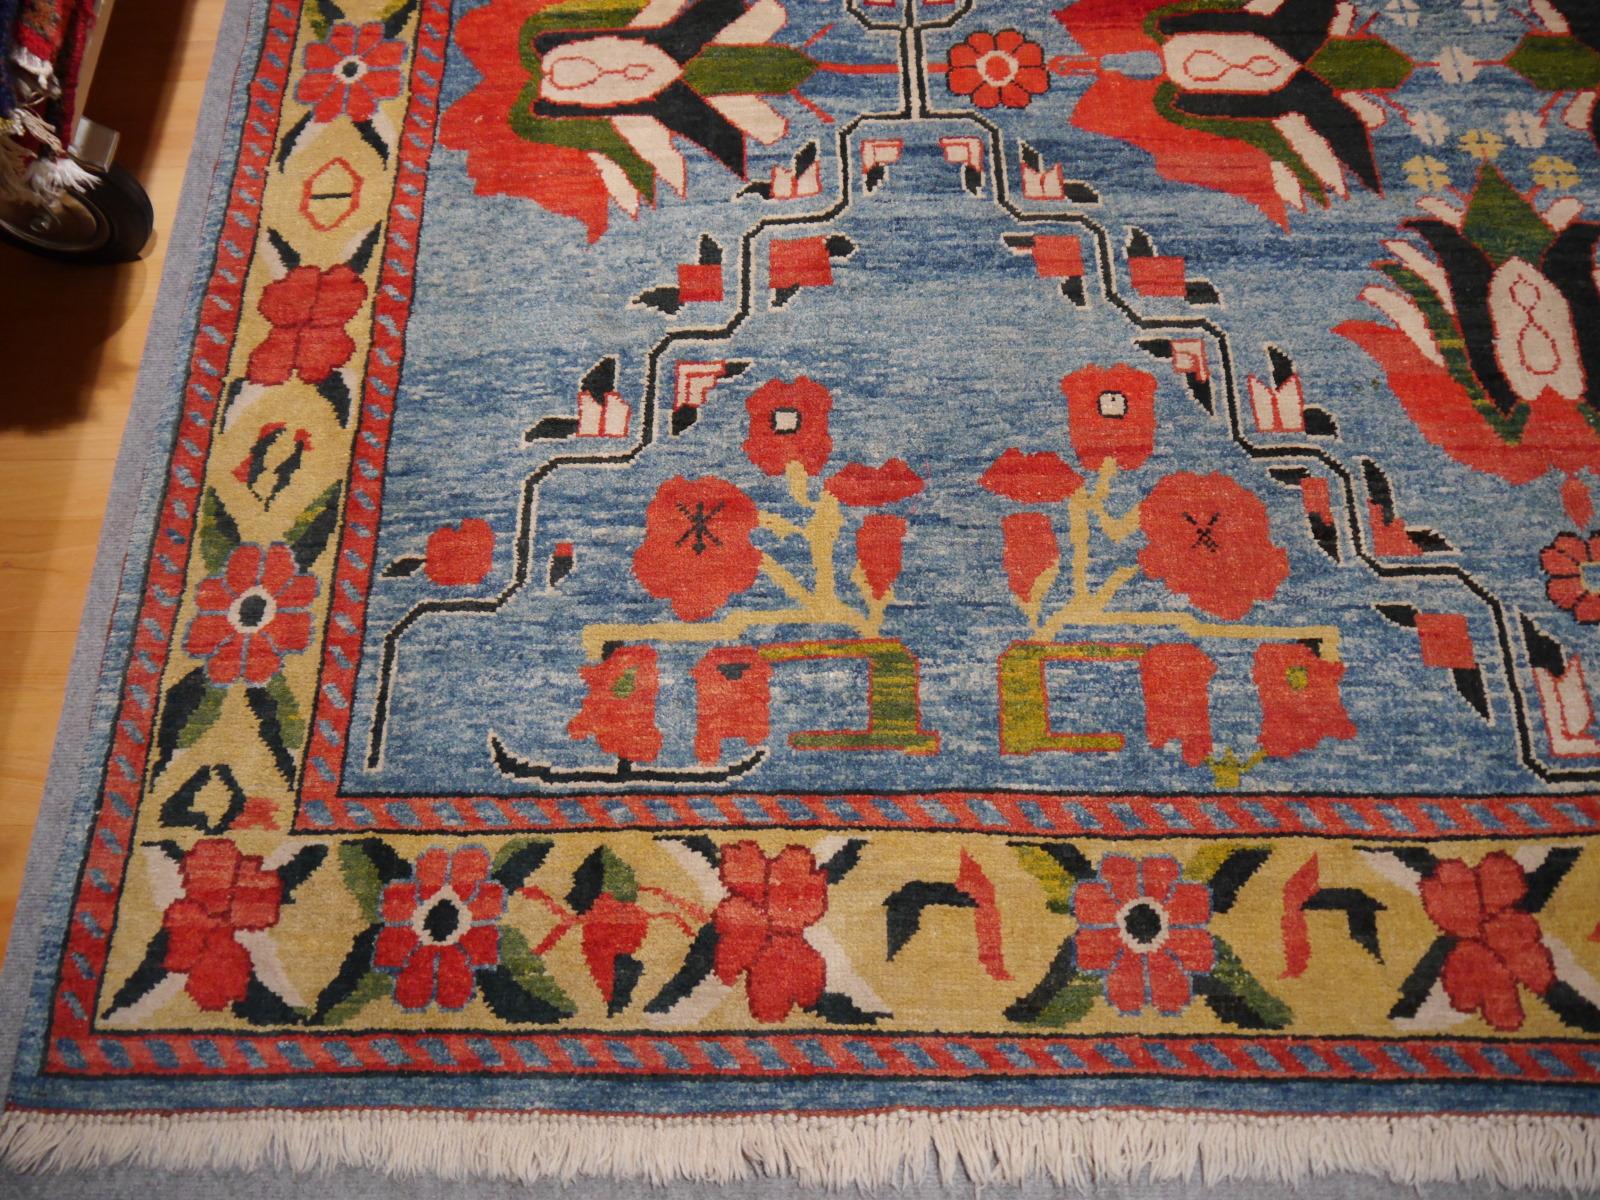 20th Century Vintage Turkish Rug Light Blue Azeri Heriz Carpet with Lotus and Tulips in Red 